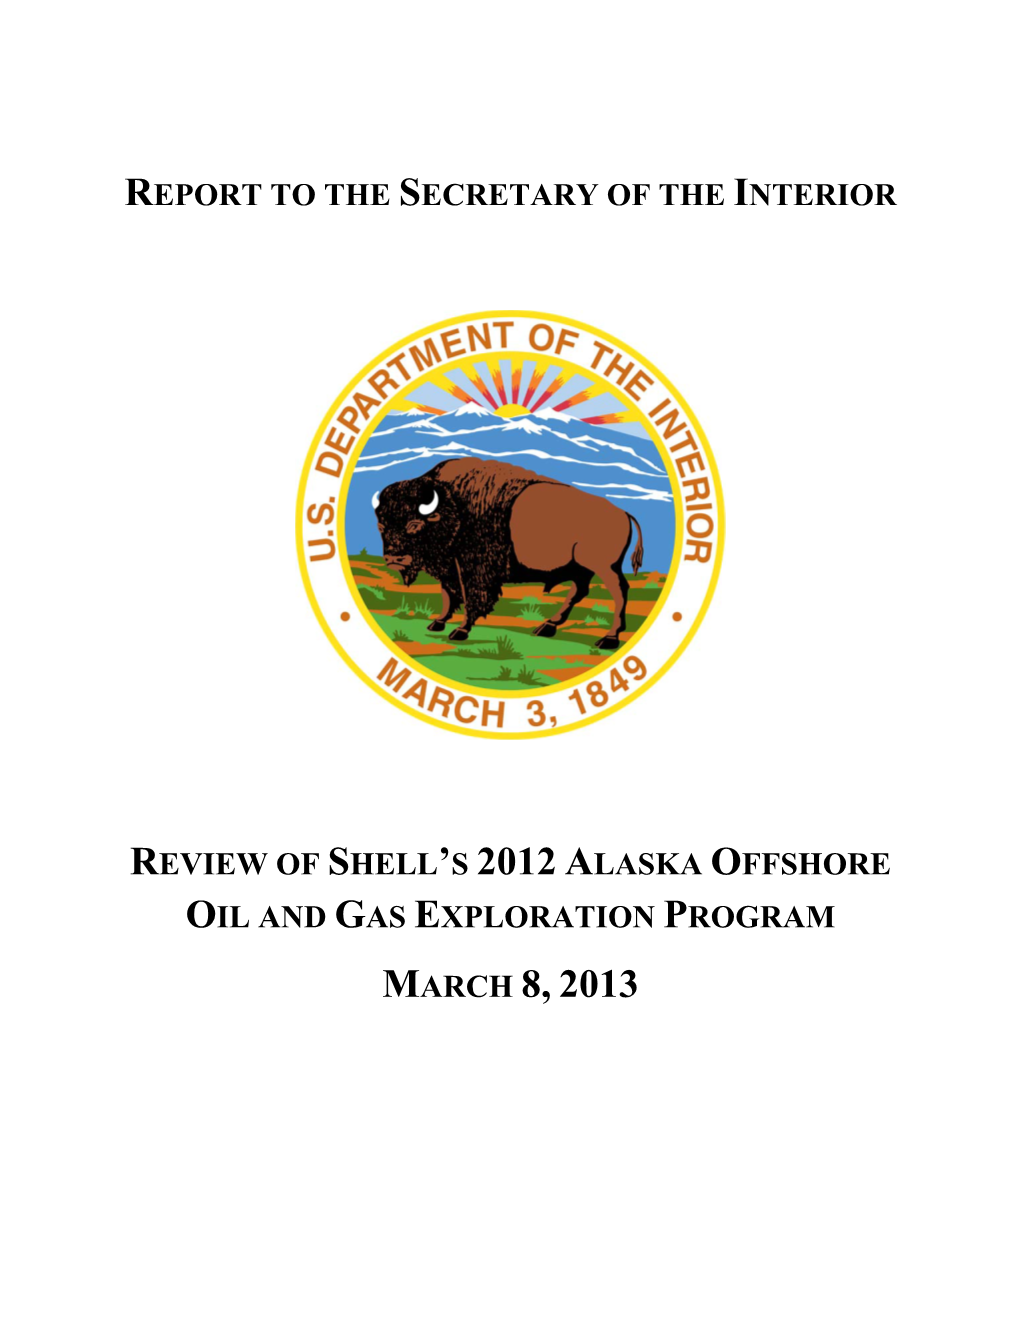 Shell’S 2012 Alaska Offshore Oil and Gas Exploration Program March 8, 2013